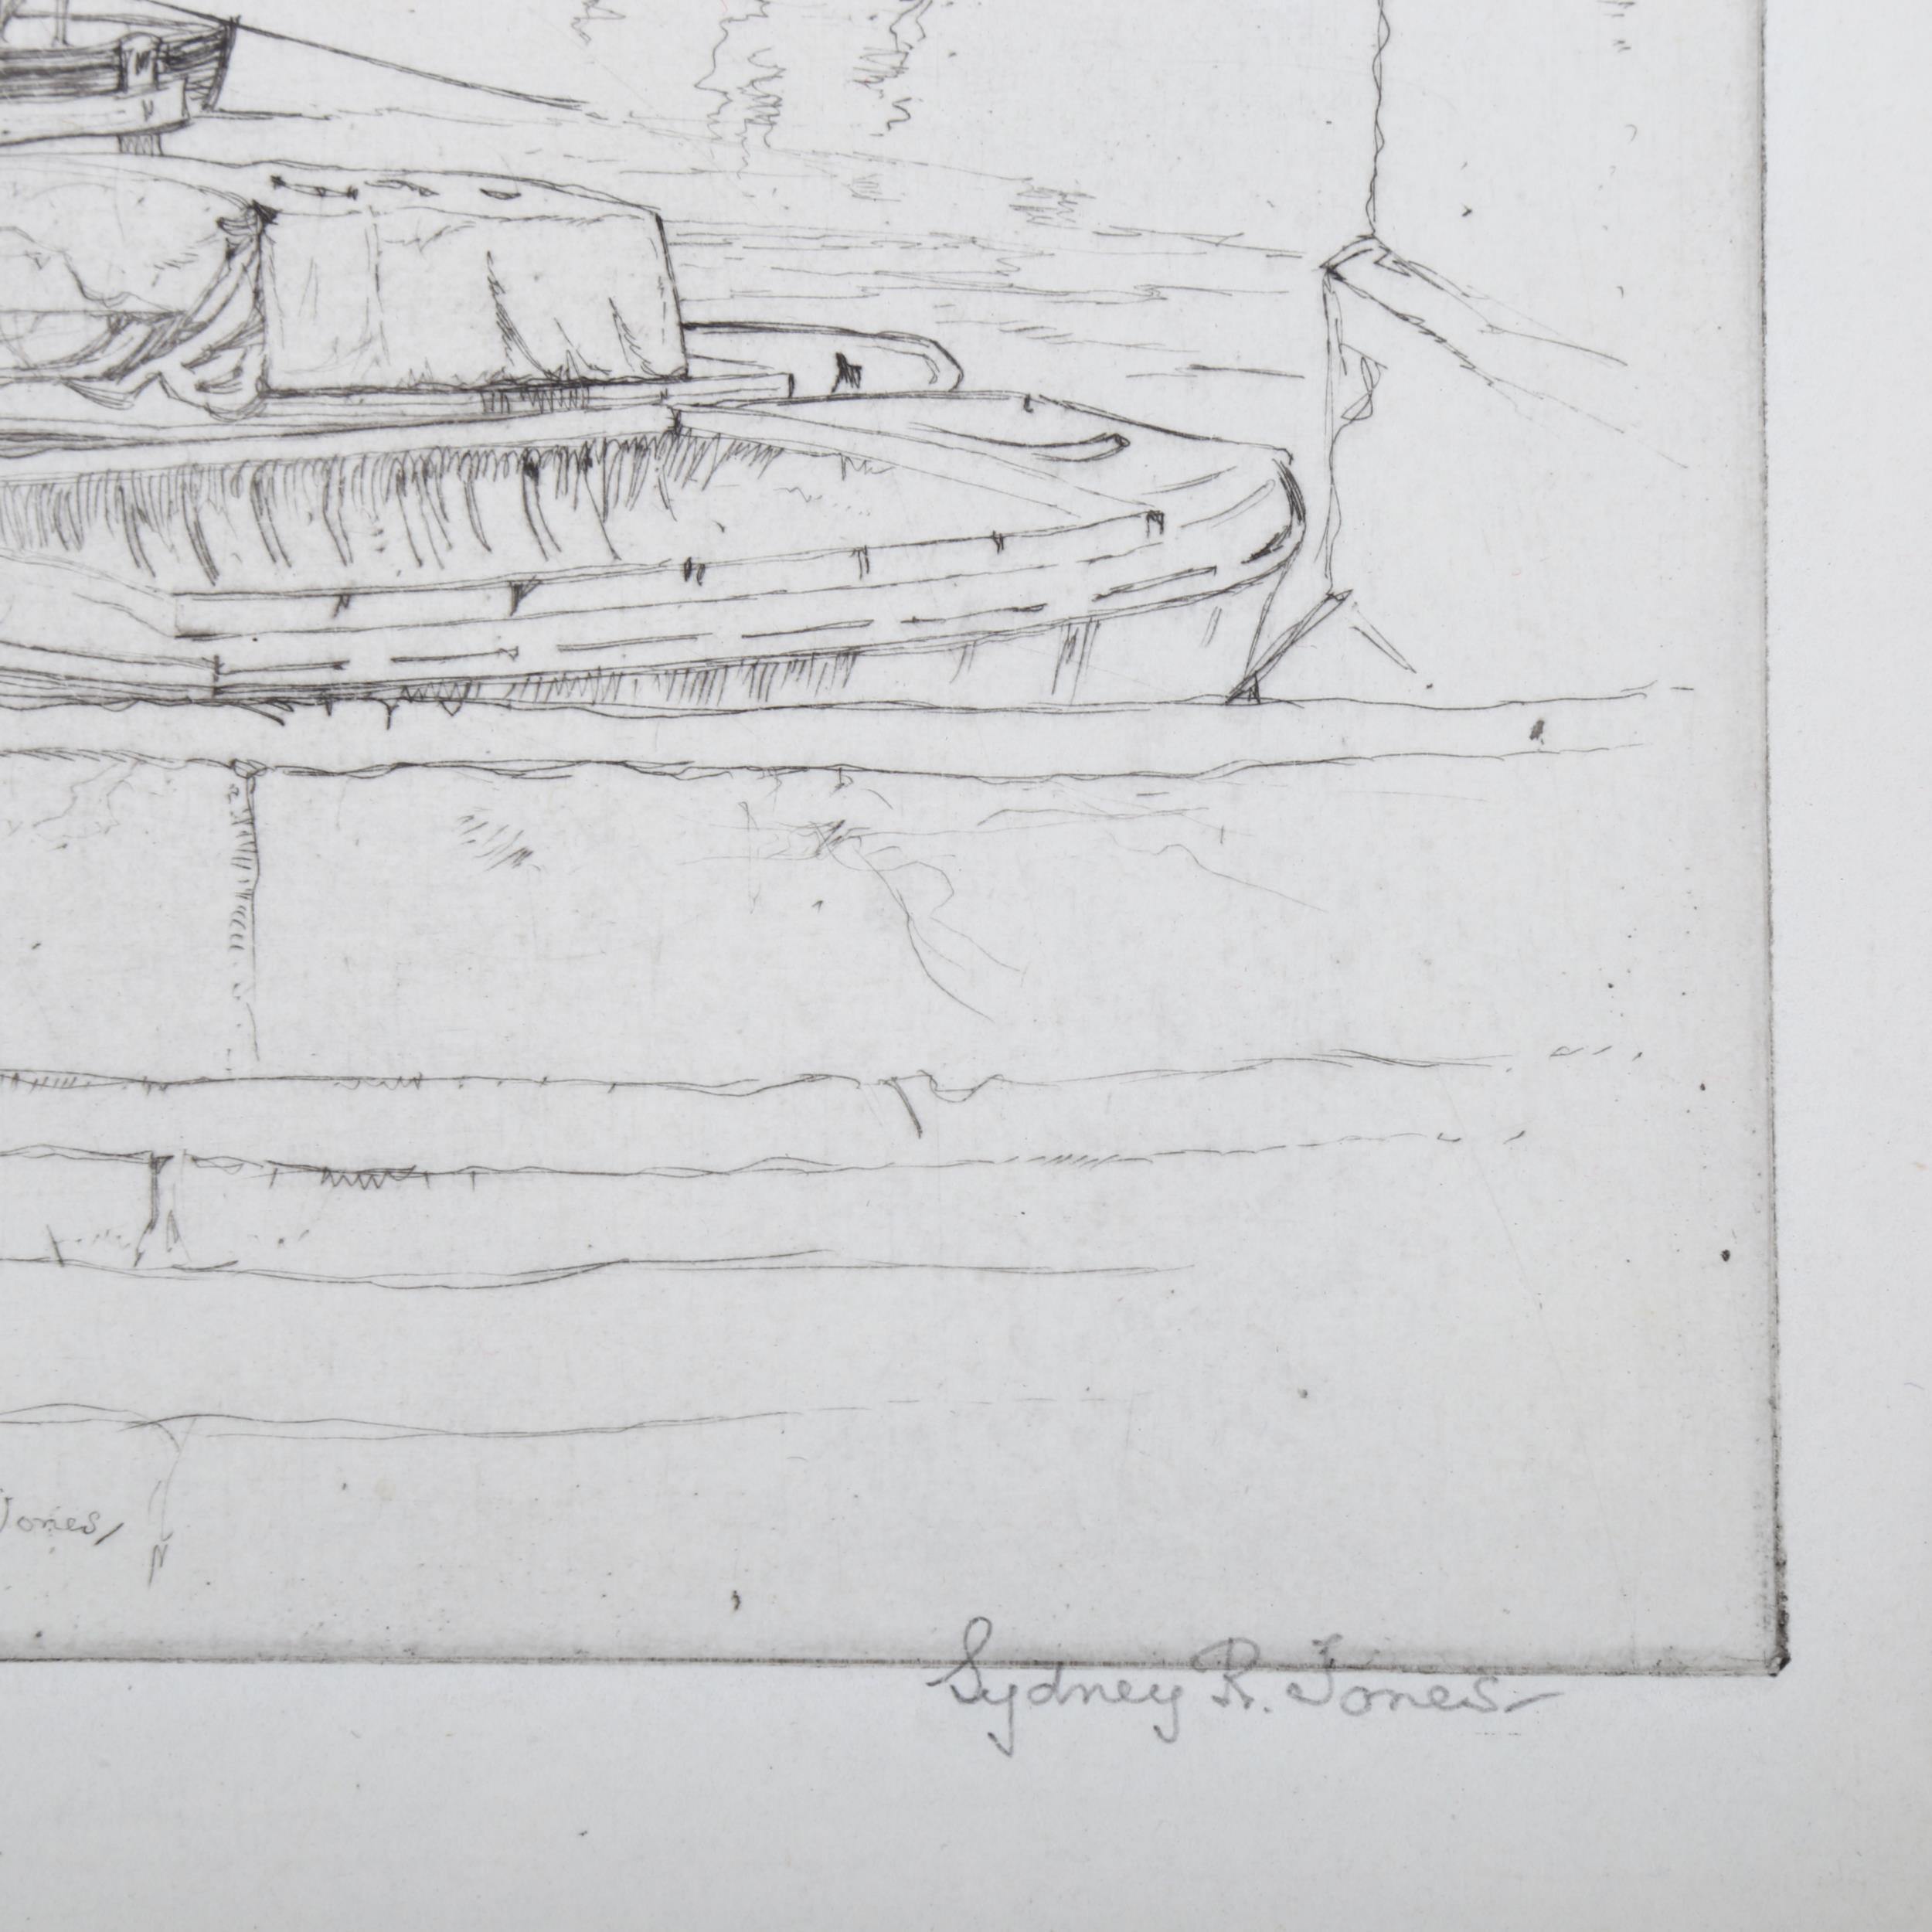 James Whistler, 2 etchings, St James's Street 1879, and London river view, signed by Sydney Jones, - Image 4 of 4